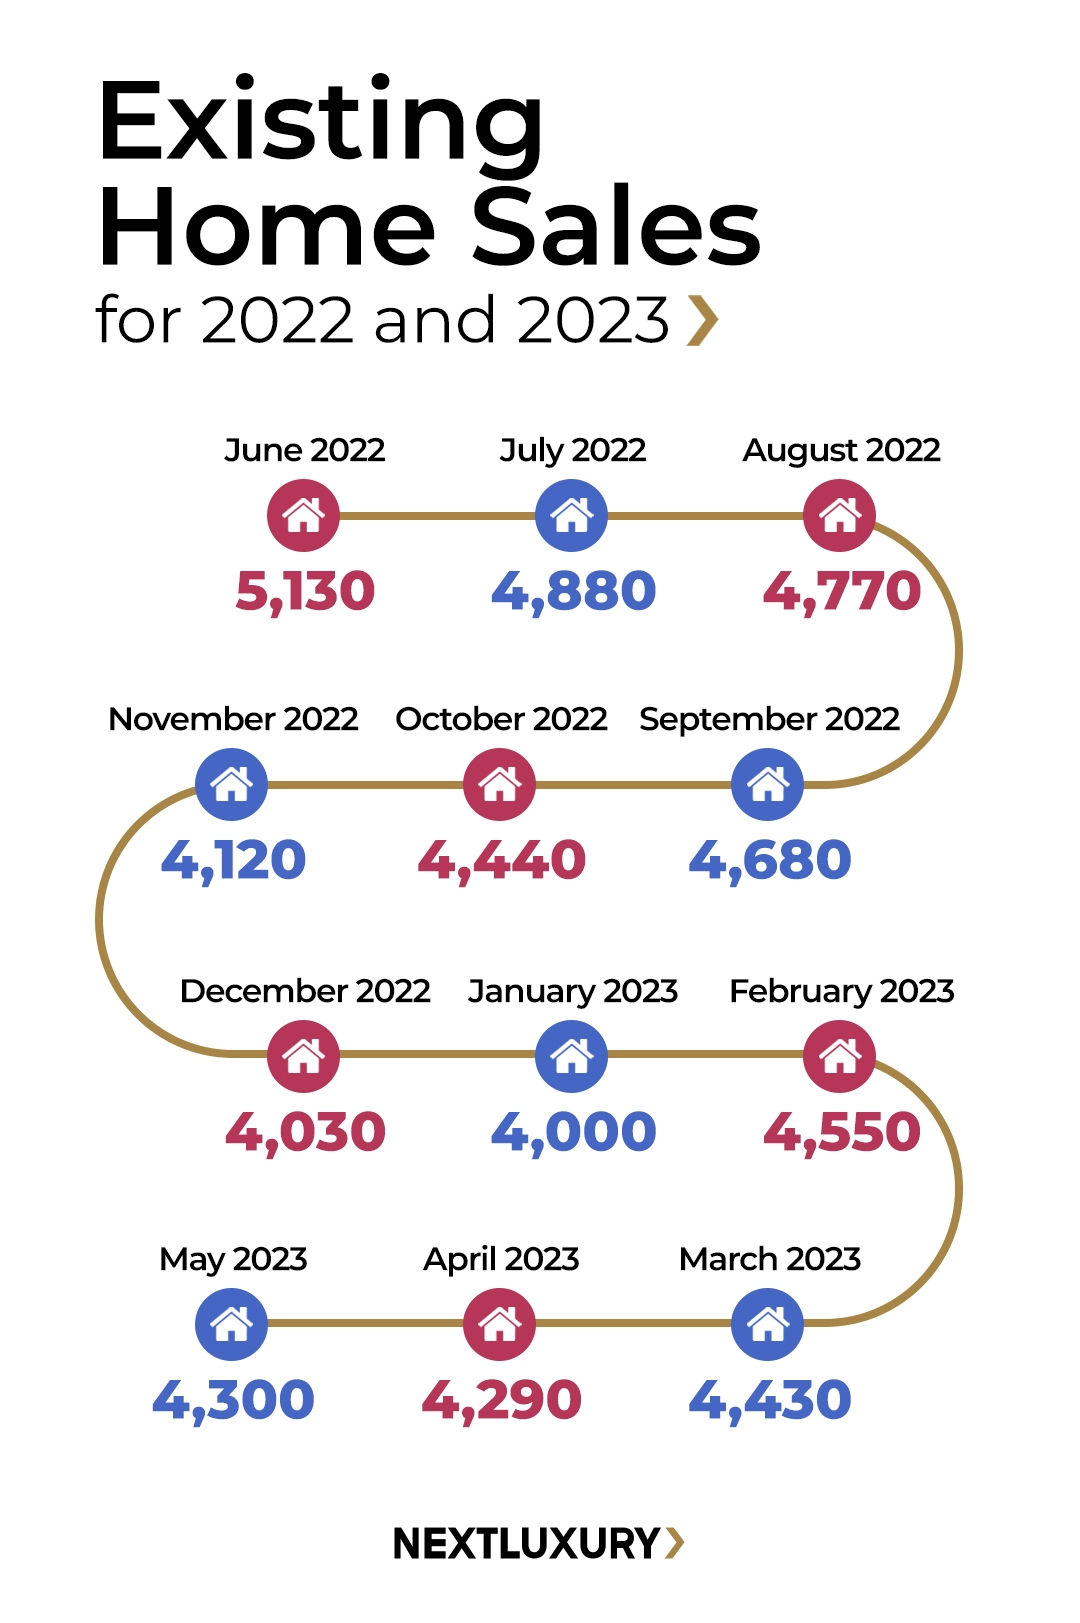 number of existing home sales for 2022 and 2023